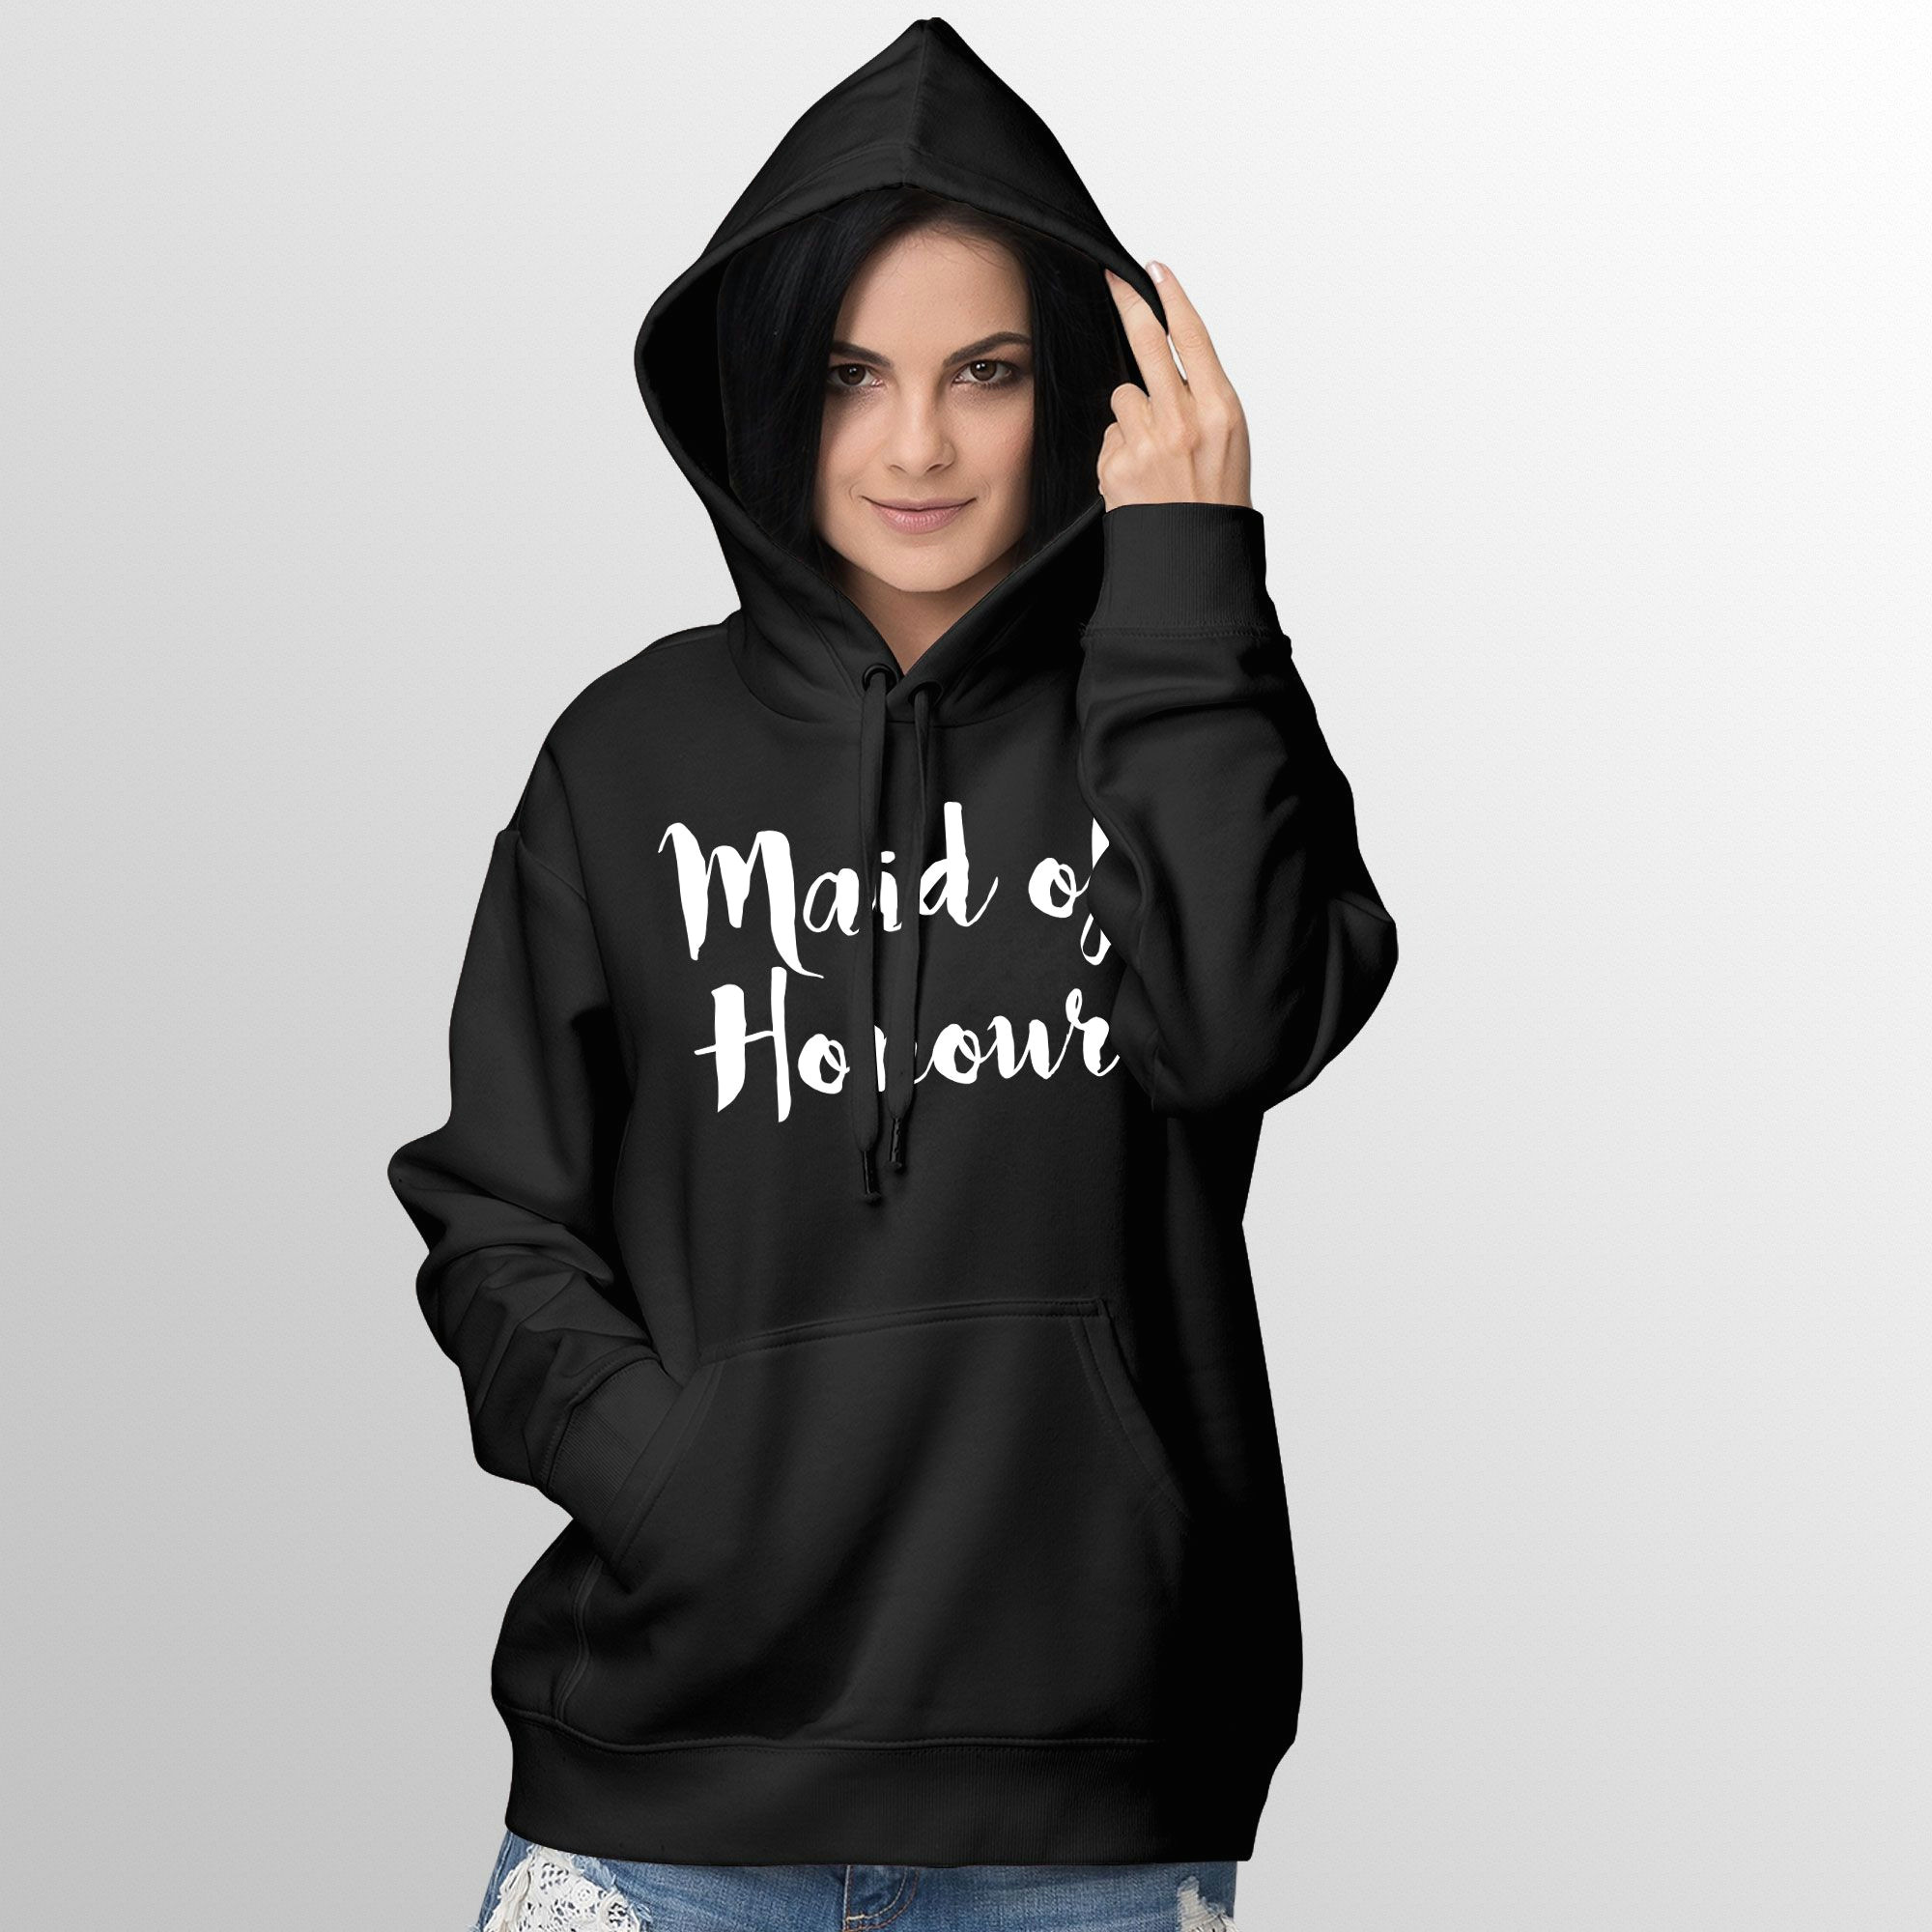 How to Draw A Girl In A Hoodie Maid Of Honour Hoodie Quote Slogan Illustration